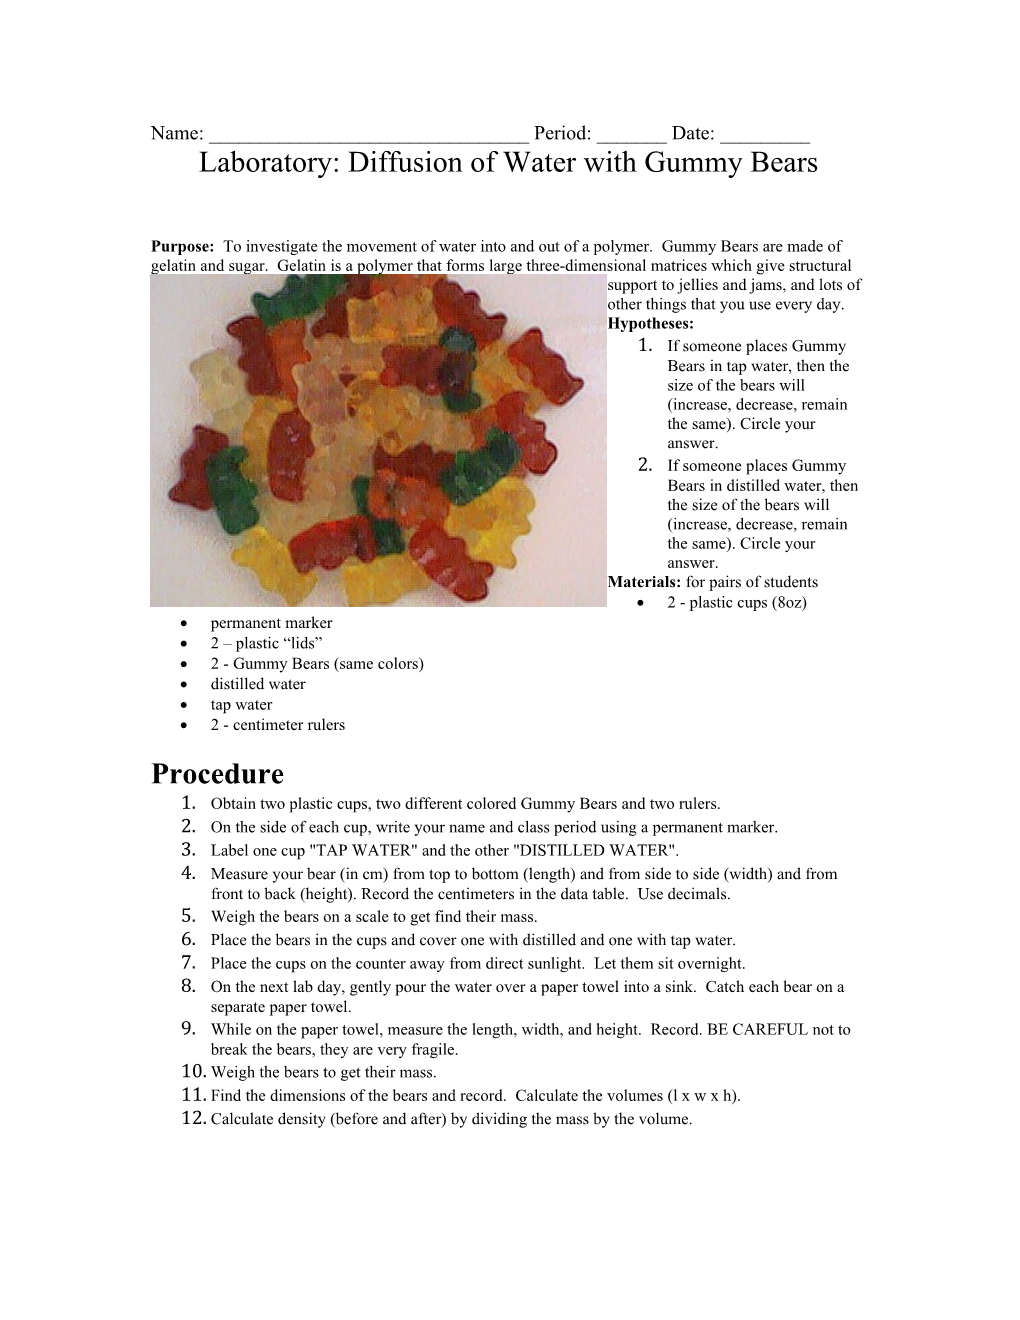 Laboratory: Diffusion of Water with Gummy Bears